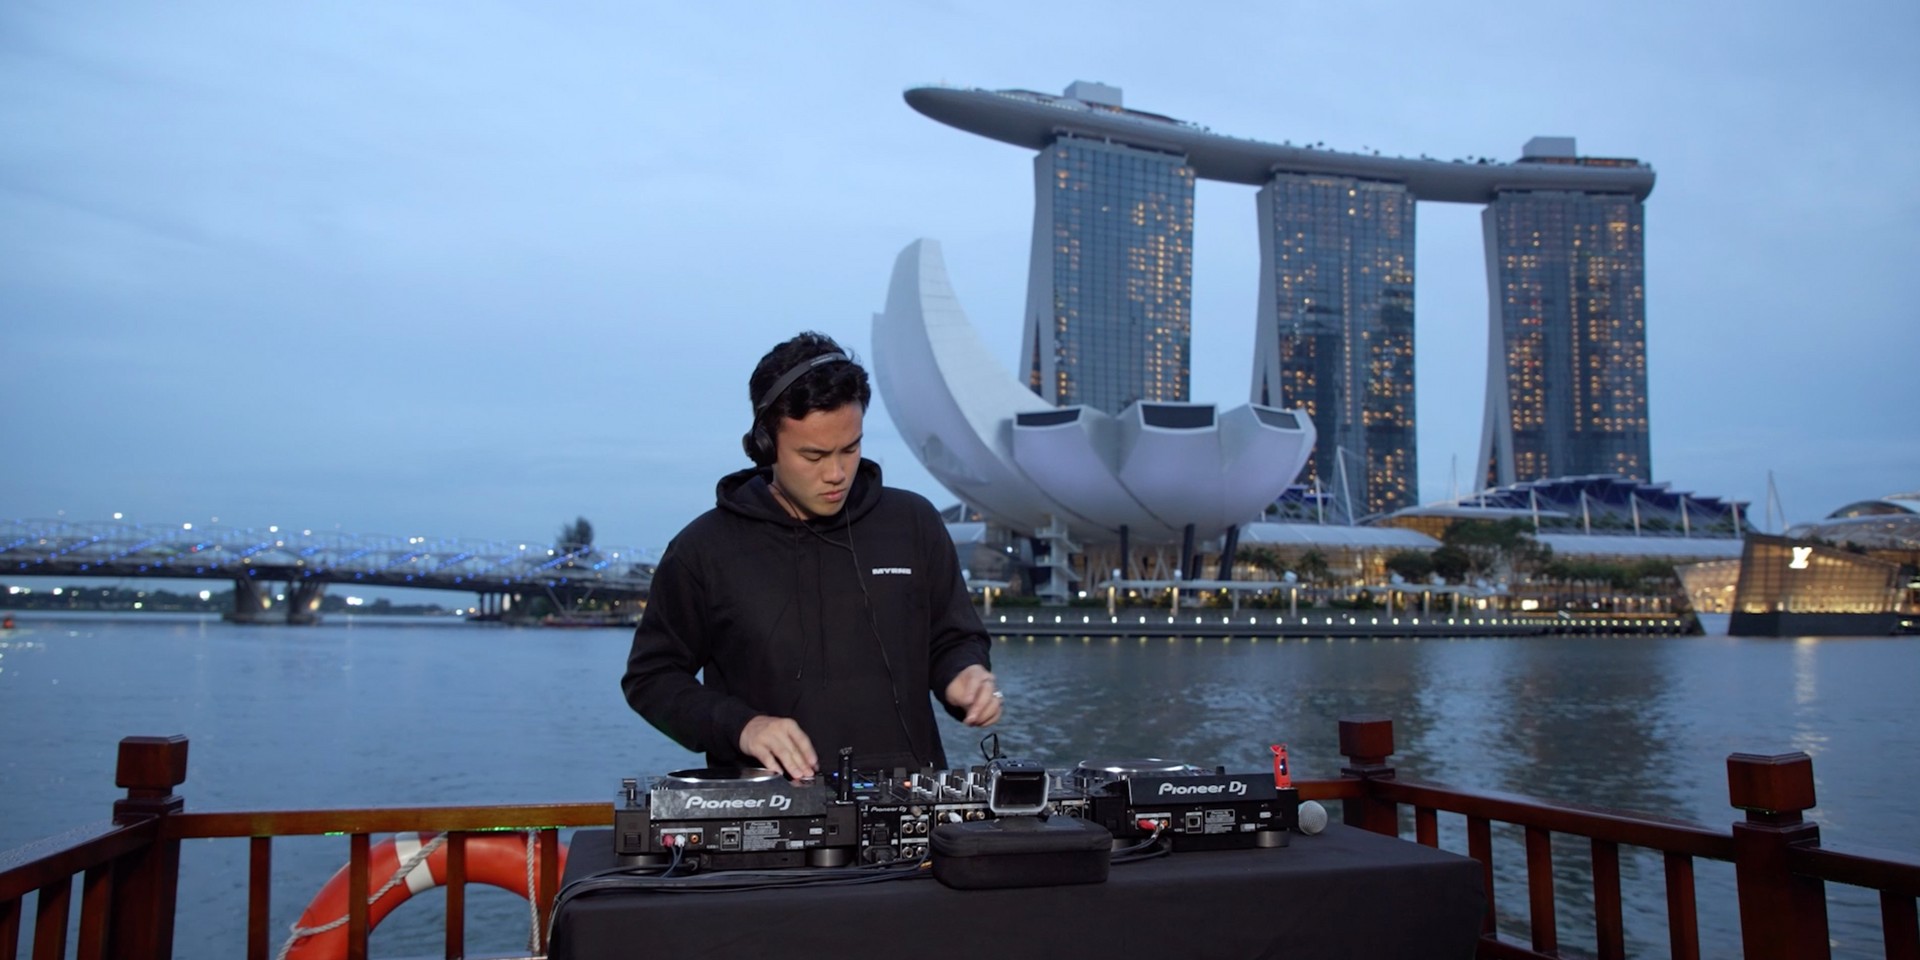 MYRNE wows in live sunset performance on Singapore Riverboat Cruise in final episode of video series 